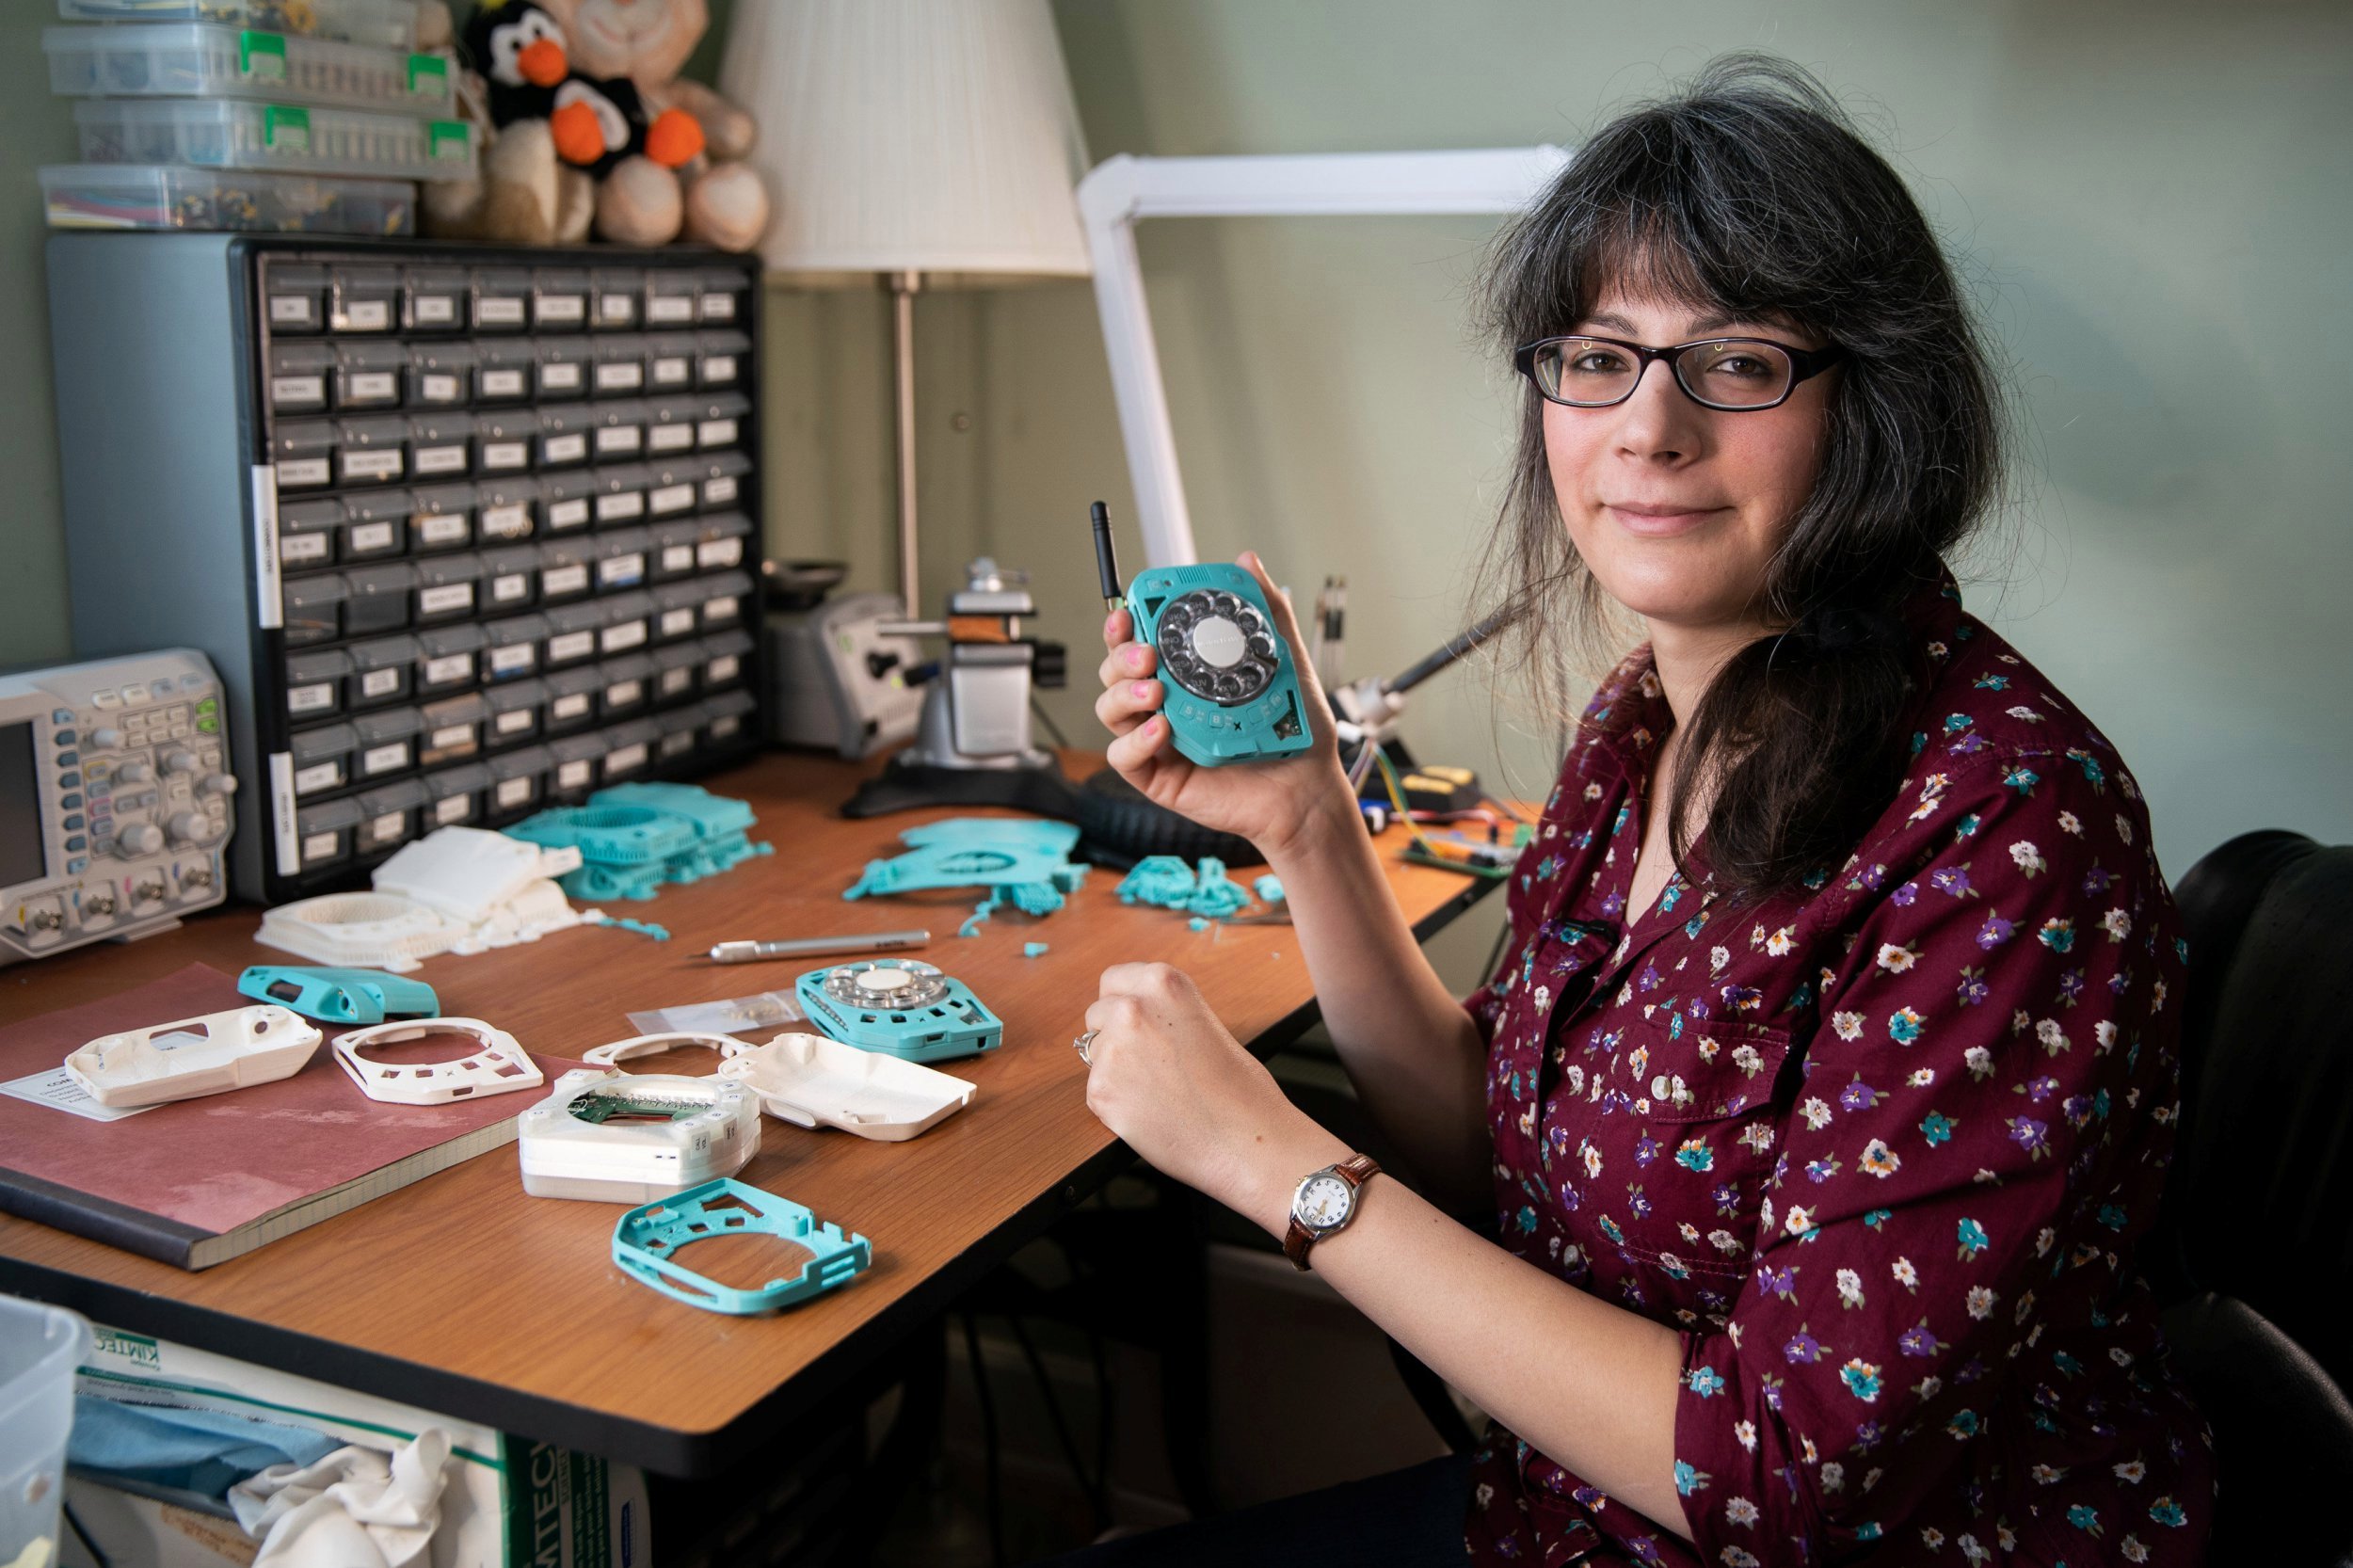 Justine Haupt, A Space Engineer  Invented Anti-Smartphone With Rotary Dial